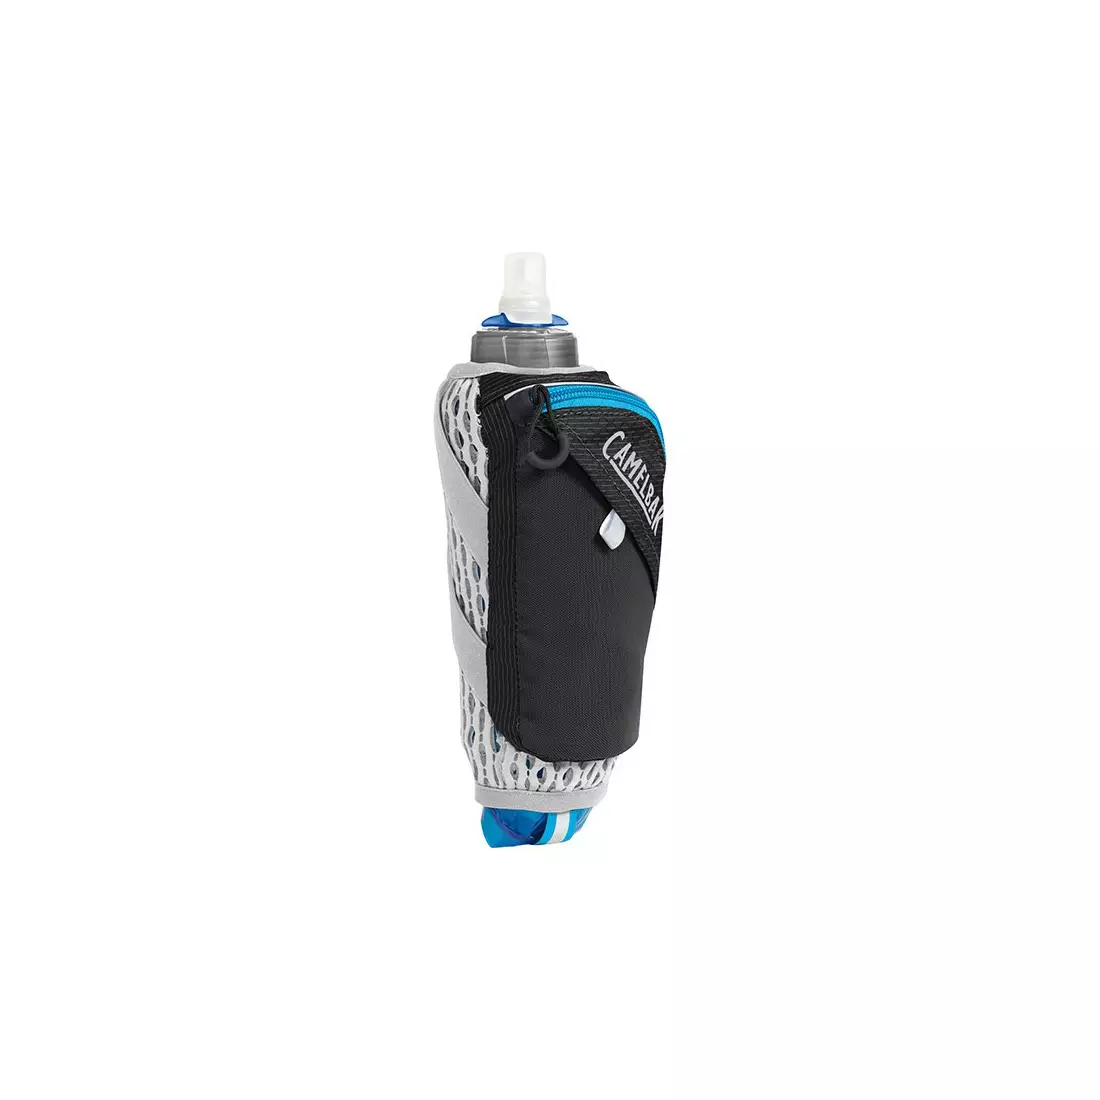 Camelbak thermal water bottle with a running handle Ultra Handheld Chill 0.5L Quick Stow Flask Black/Atomic Blue